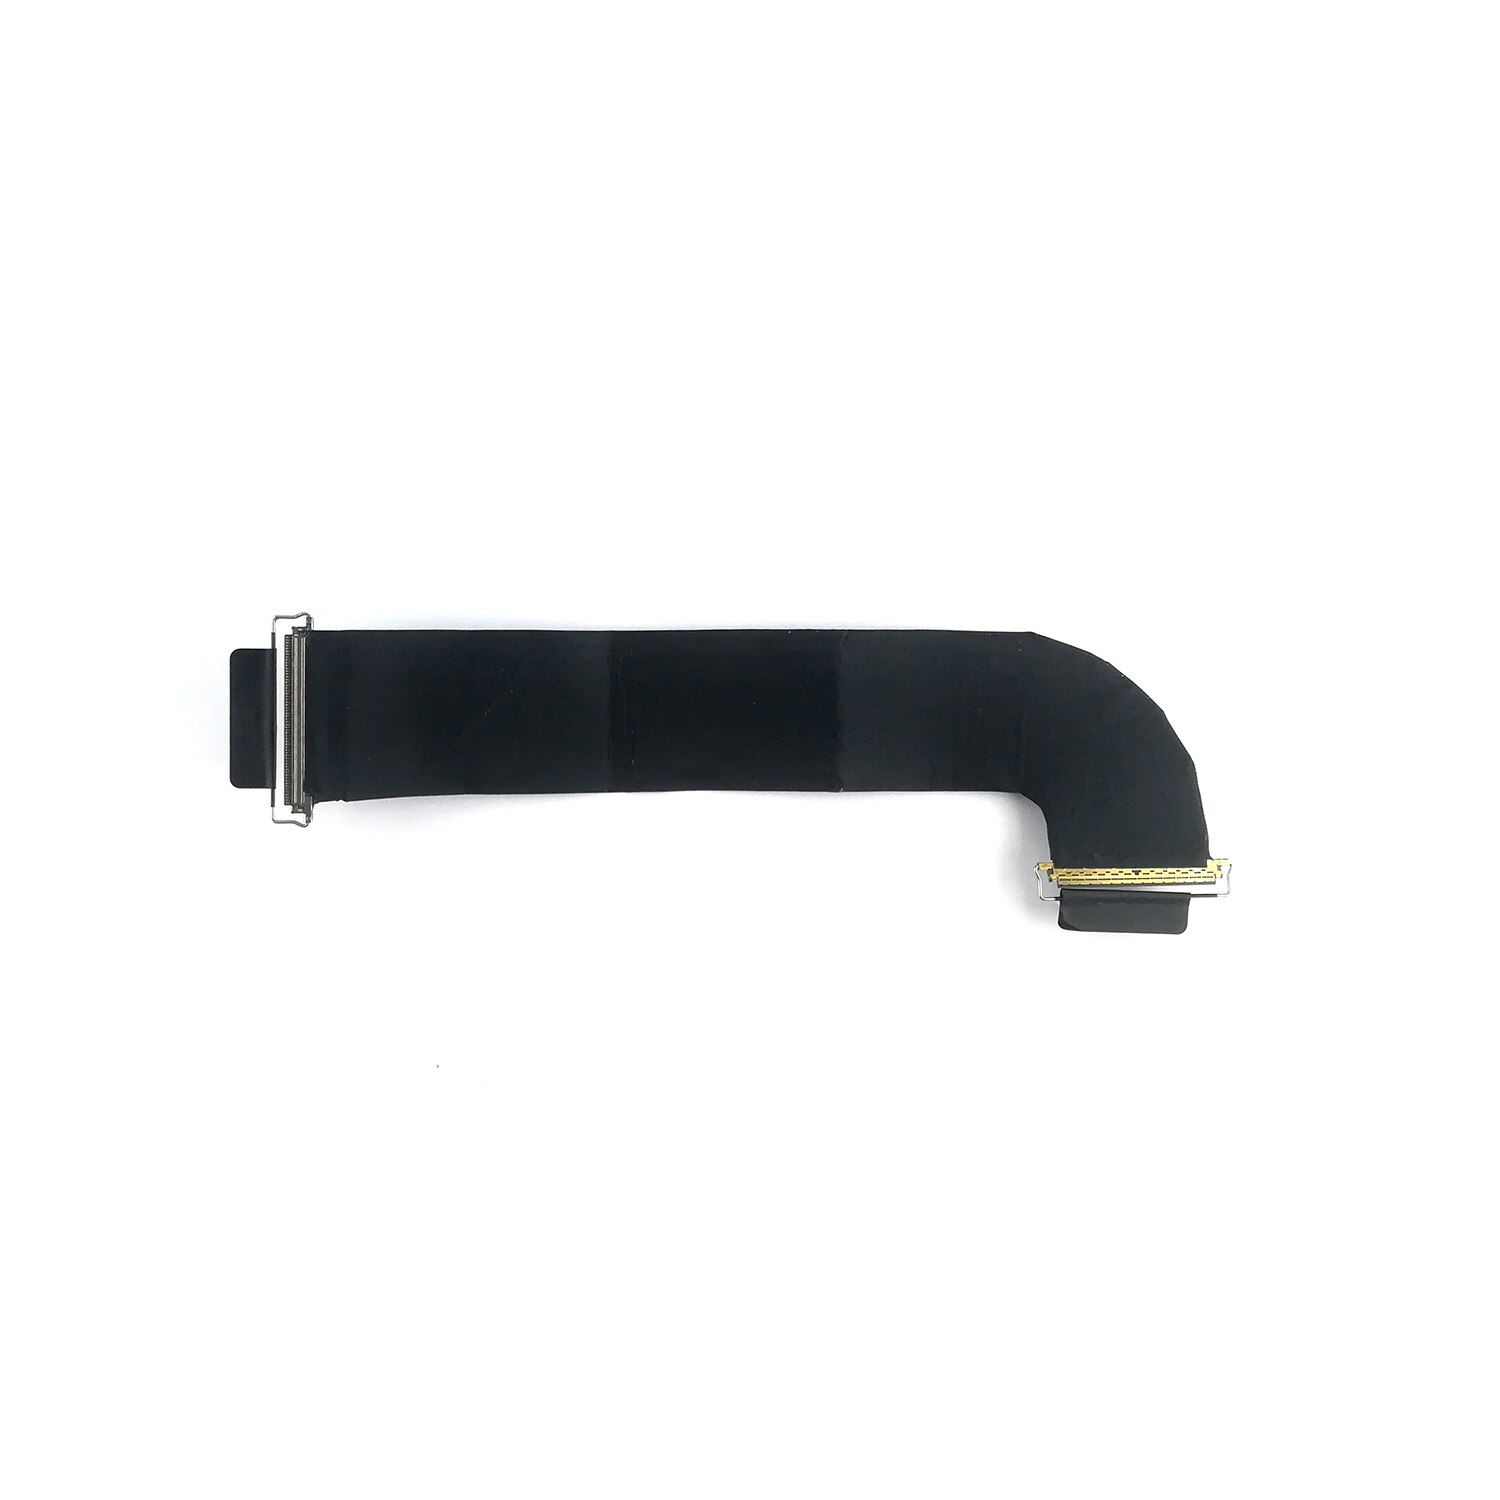 LVDS Connector 40Pin For iMac 21.5 A1418 4K 2015